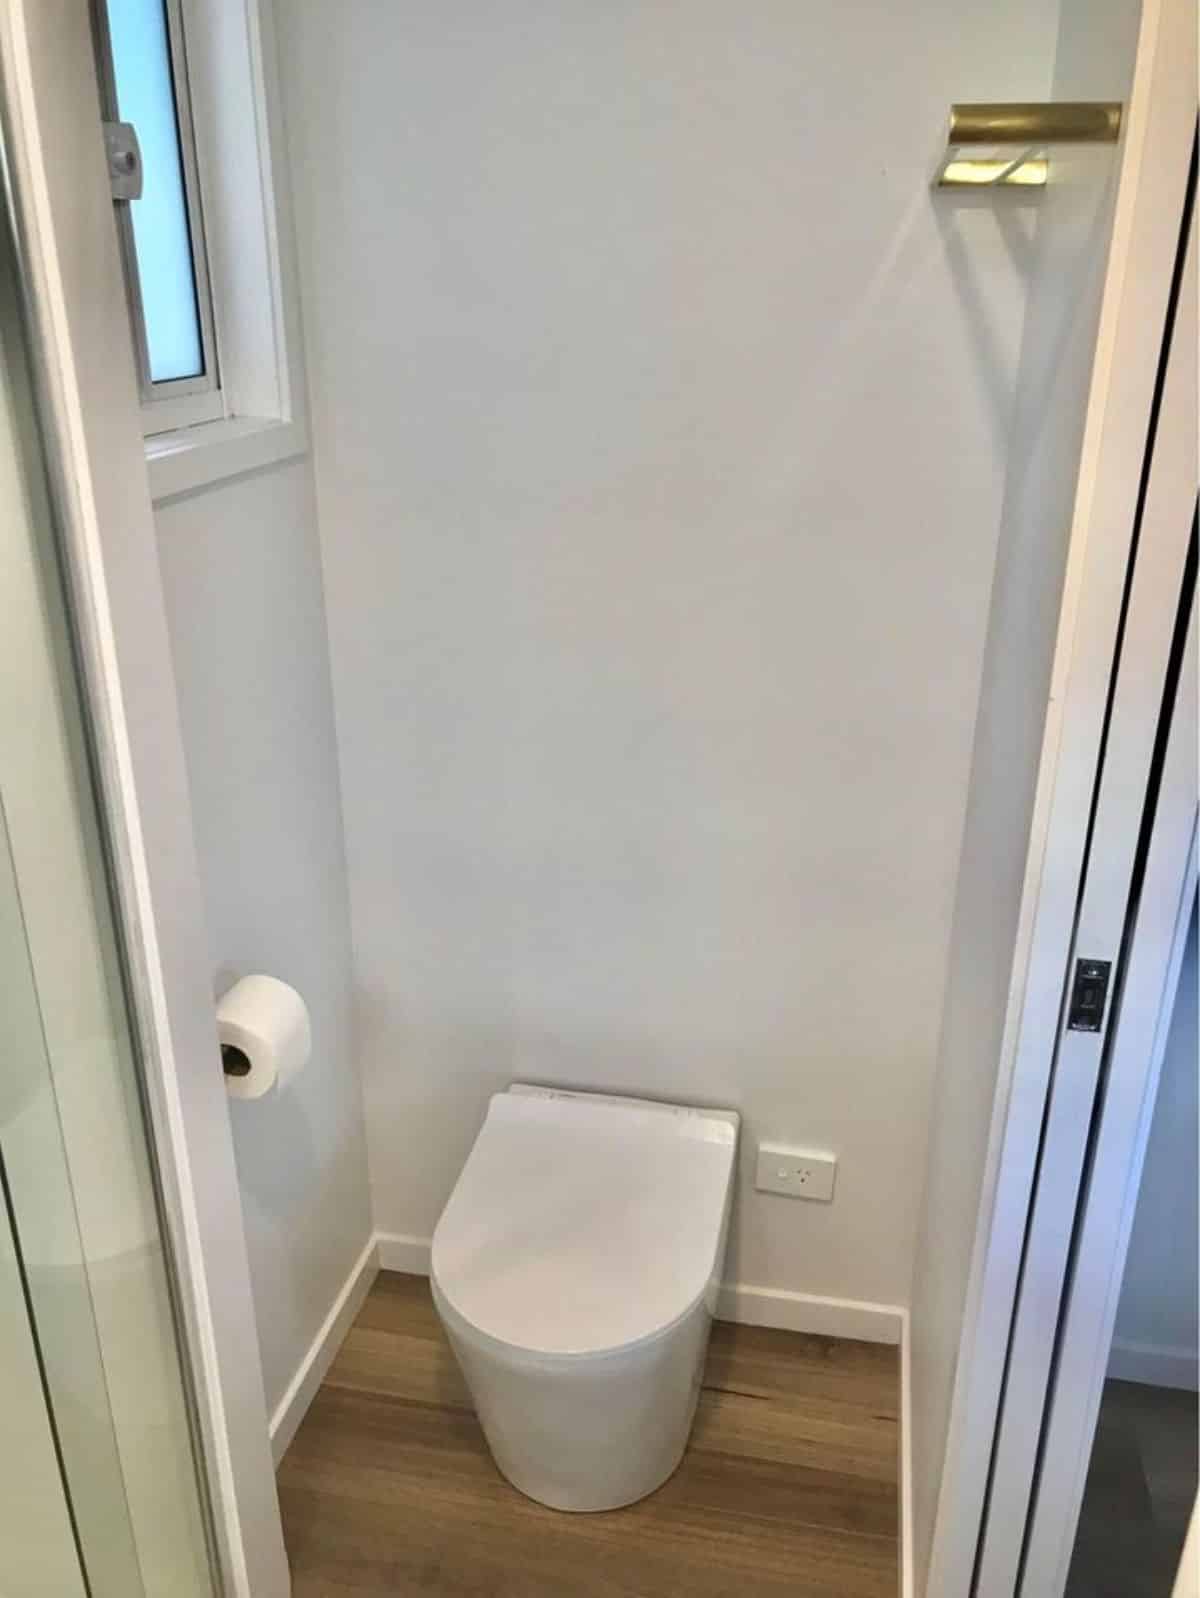 Composting toilet is installed in bathroom of furnished tiny house